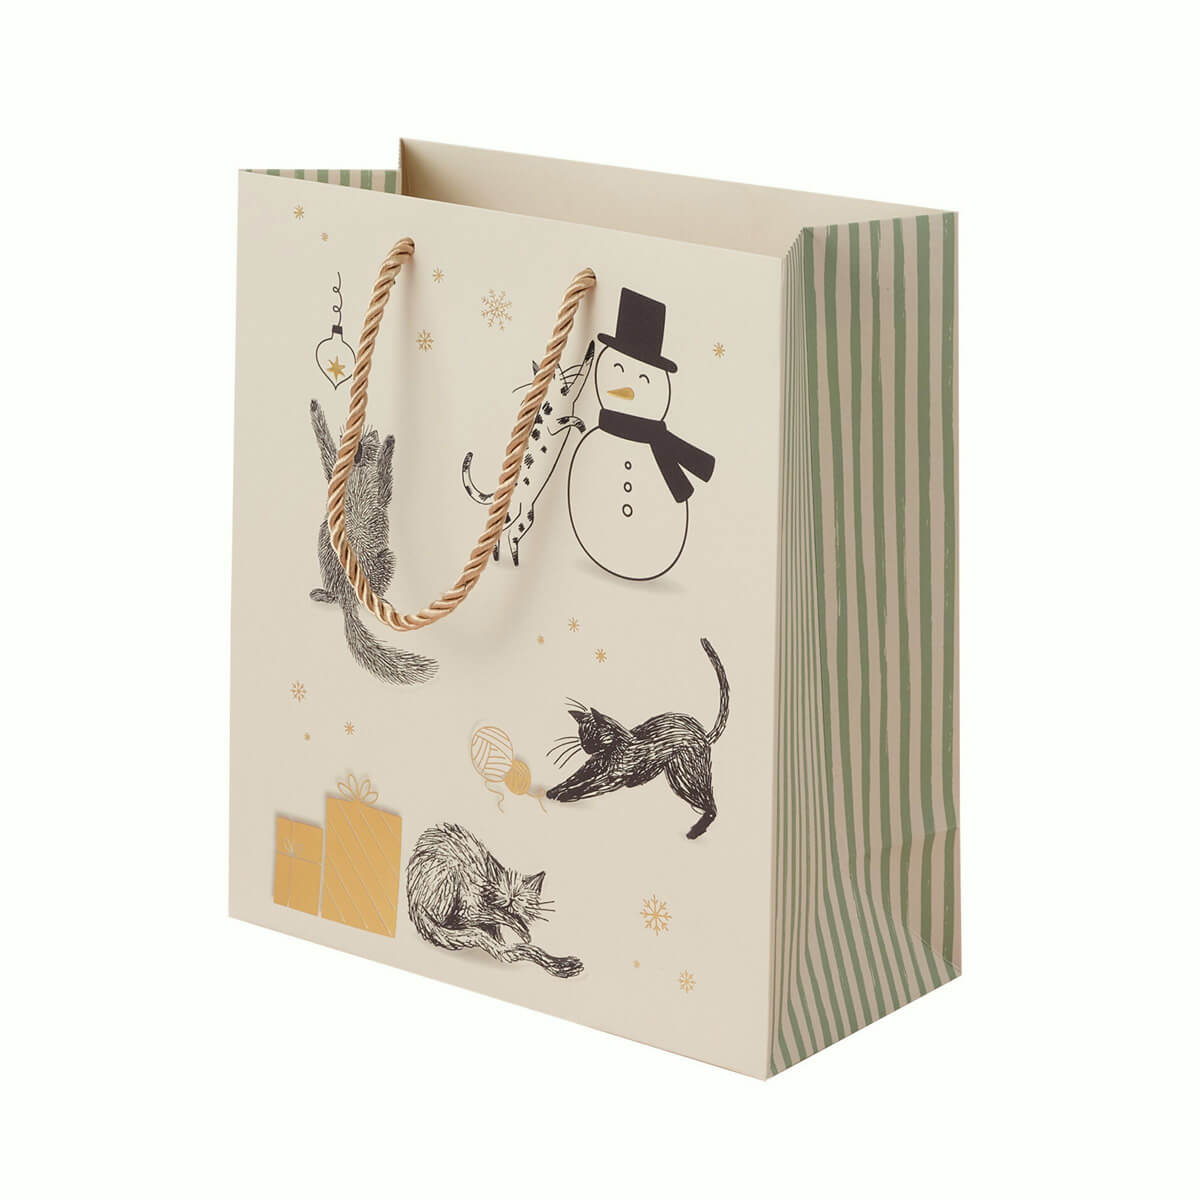 Battersea Dogs & Cats Home Christmas Medium sized gift bag - close up image of gift bag